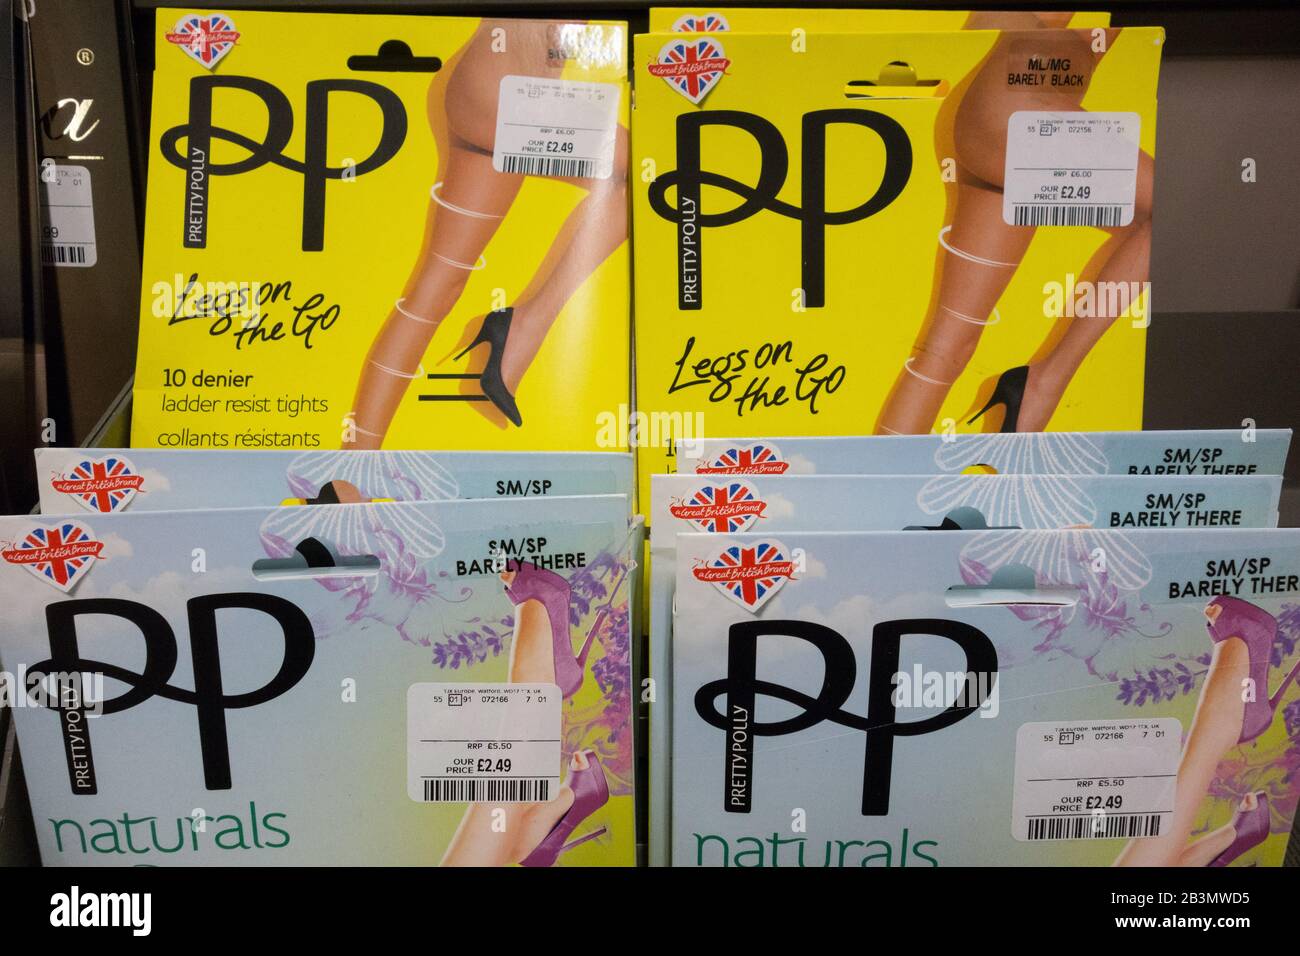 Pretty Polly tights and stockings packaging Stock Photo